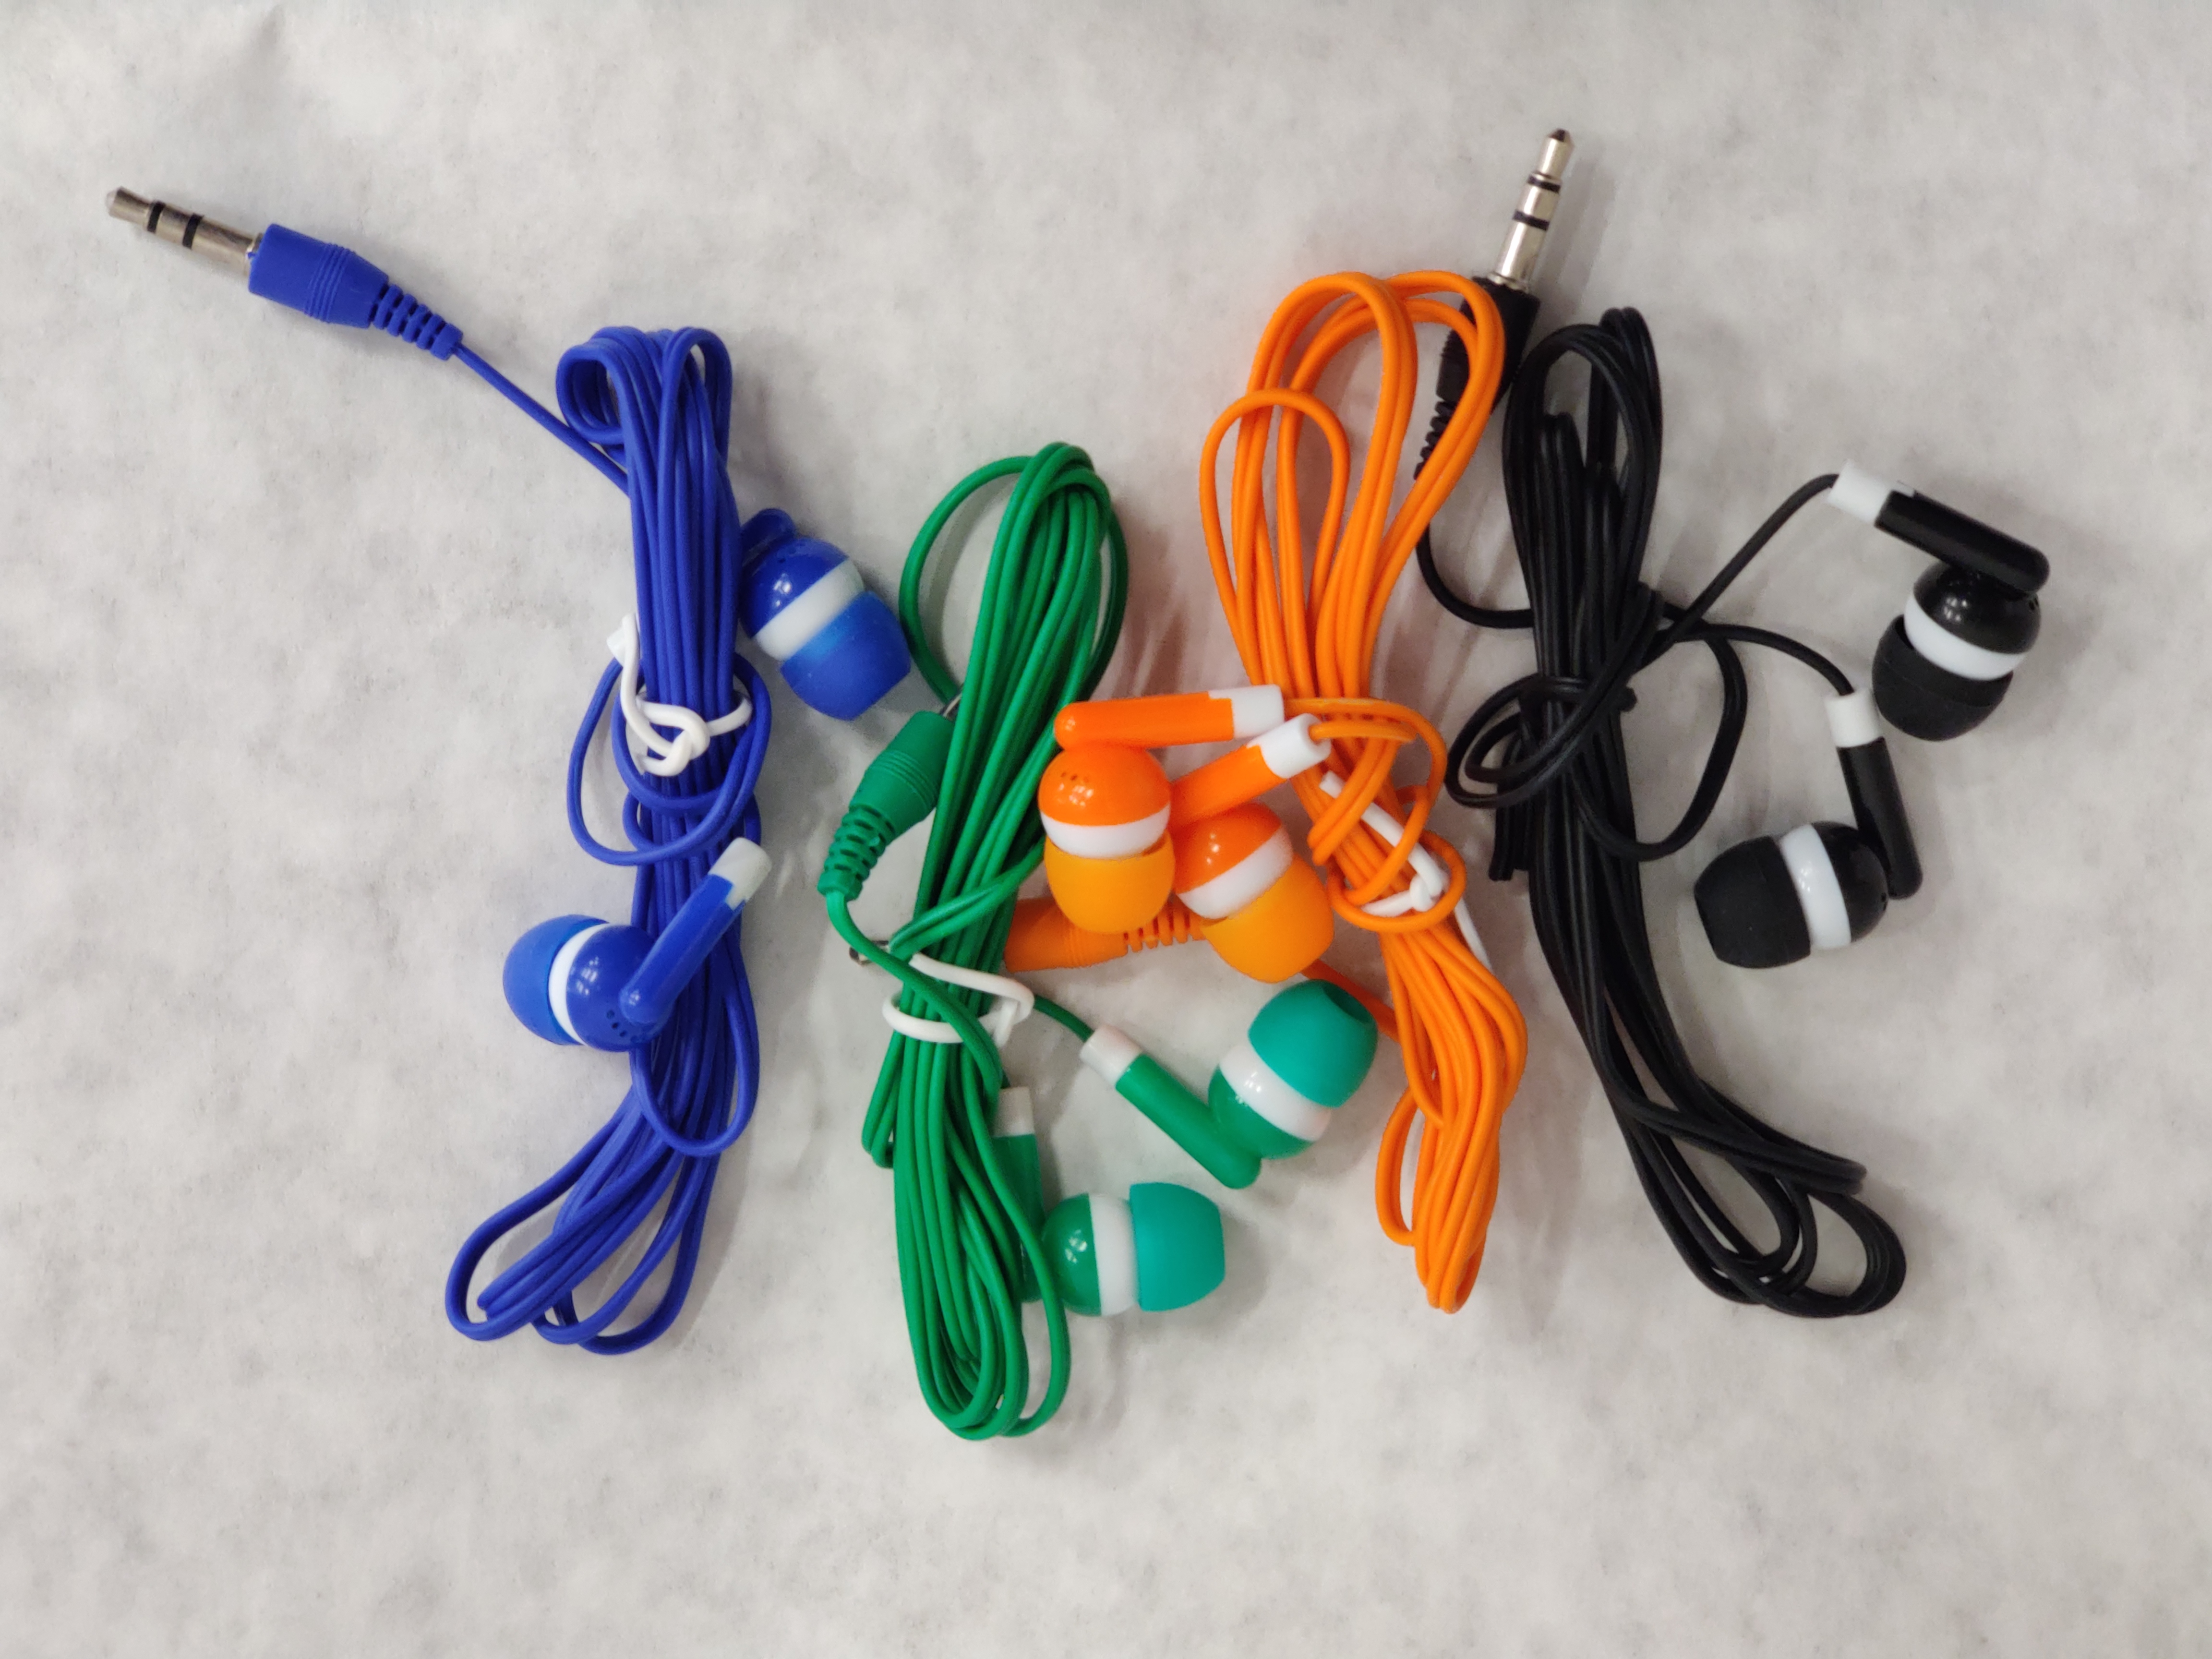 Wrapped earbud sets in blue, green, orange, and black